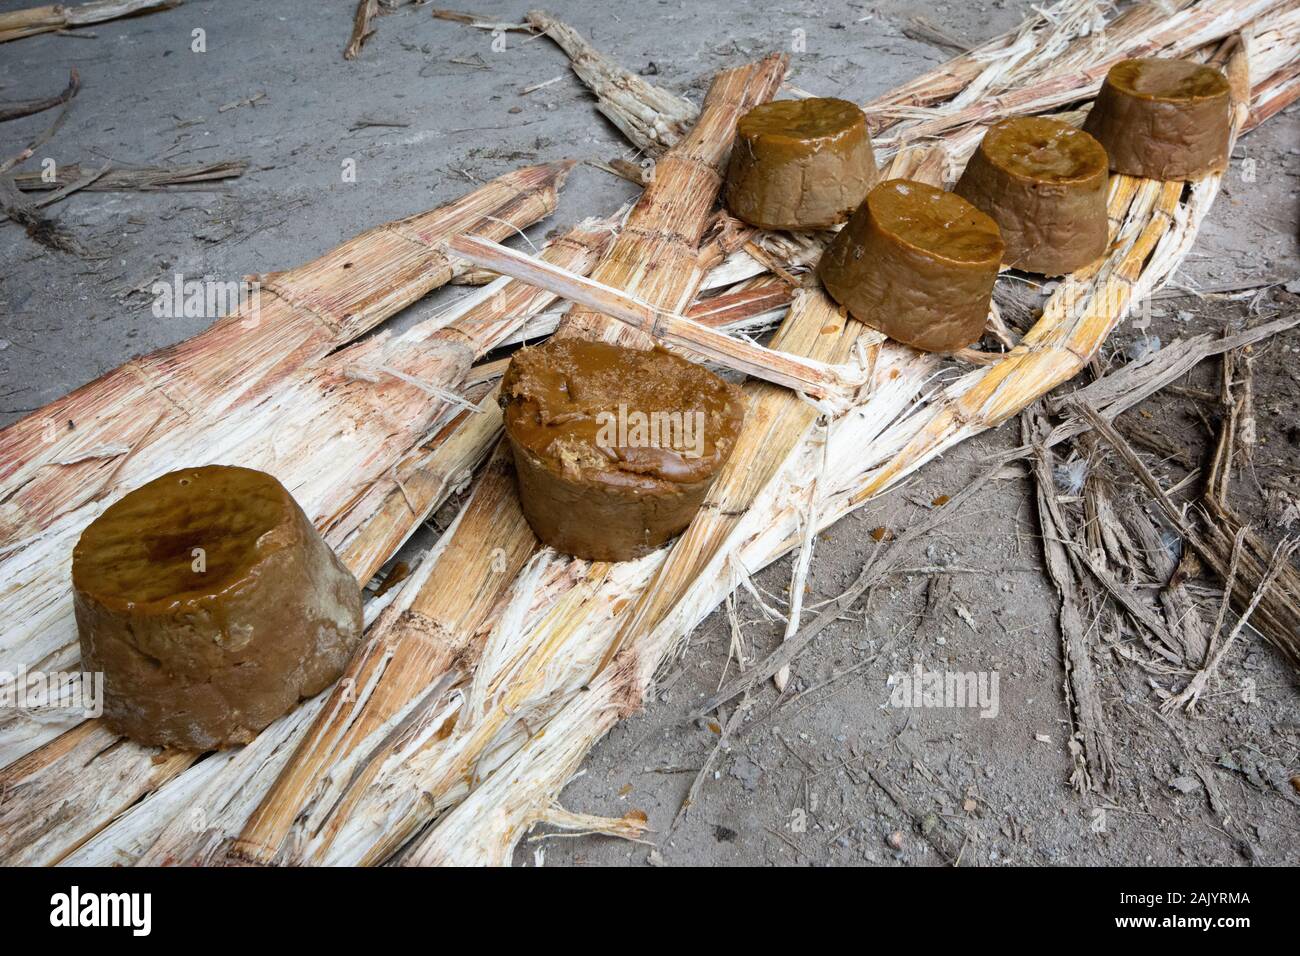 Blocks of chancaca or artisanal sugar made in moulds in a traditional way in Amazonas in northern Peru Stock Photo